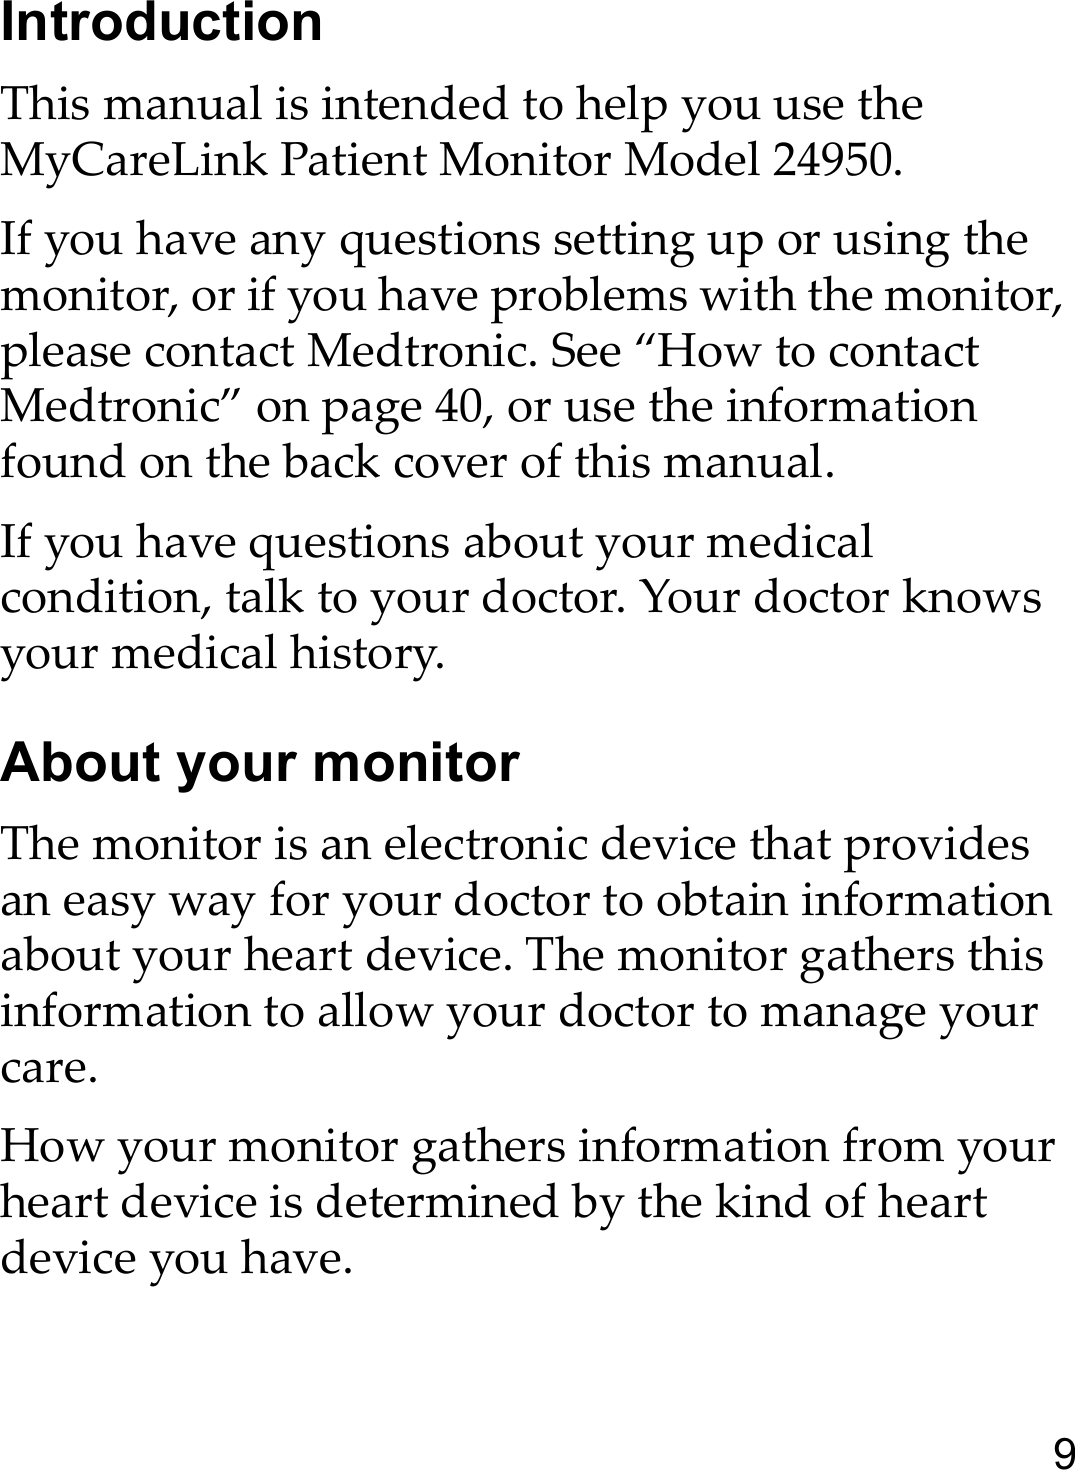 9IntroductionThis manual is intended to help you use the MyCareLink Patient Monitor Model 24950.If you have any questions setting up or using the monitor, or if you have problems with the monitor, please contact Medtronic. See “How to contact Medtronic” on page 40, or use the information found on the back cover of this manual. If you have questions about your medical condition, talk to your doctor. Your doctor knows your medical history.About your monitorThe monitor is an electronic device that provides an easy way for your doctor to obtain information about your heart device. The monitor gathers this information to allow your doctor to manage your care.How your monitor gathers information from your heart device is determined by the kind of heart device you have. 